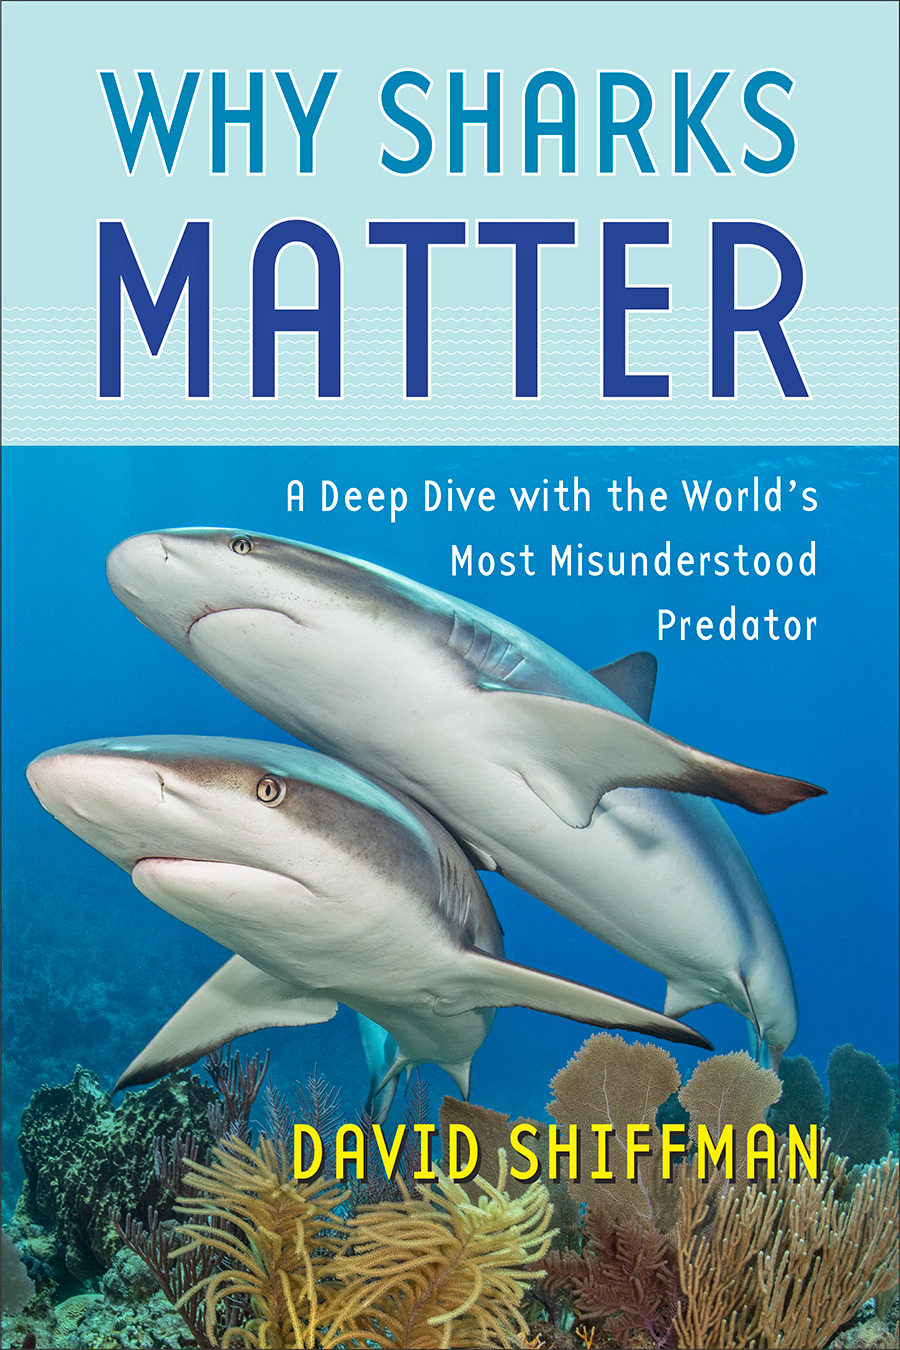 cover of book with two sharks swimming under water